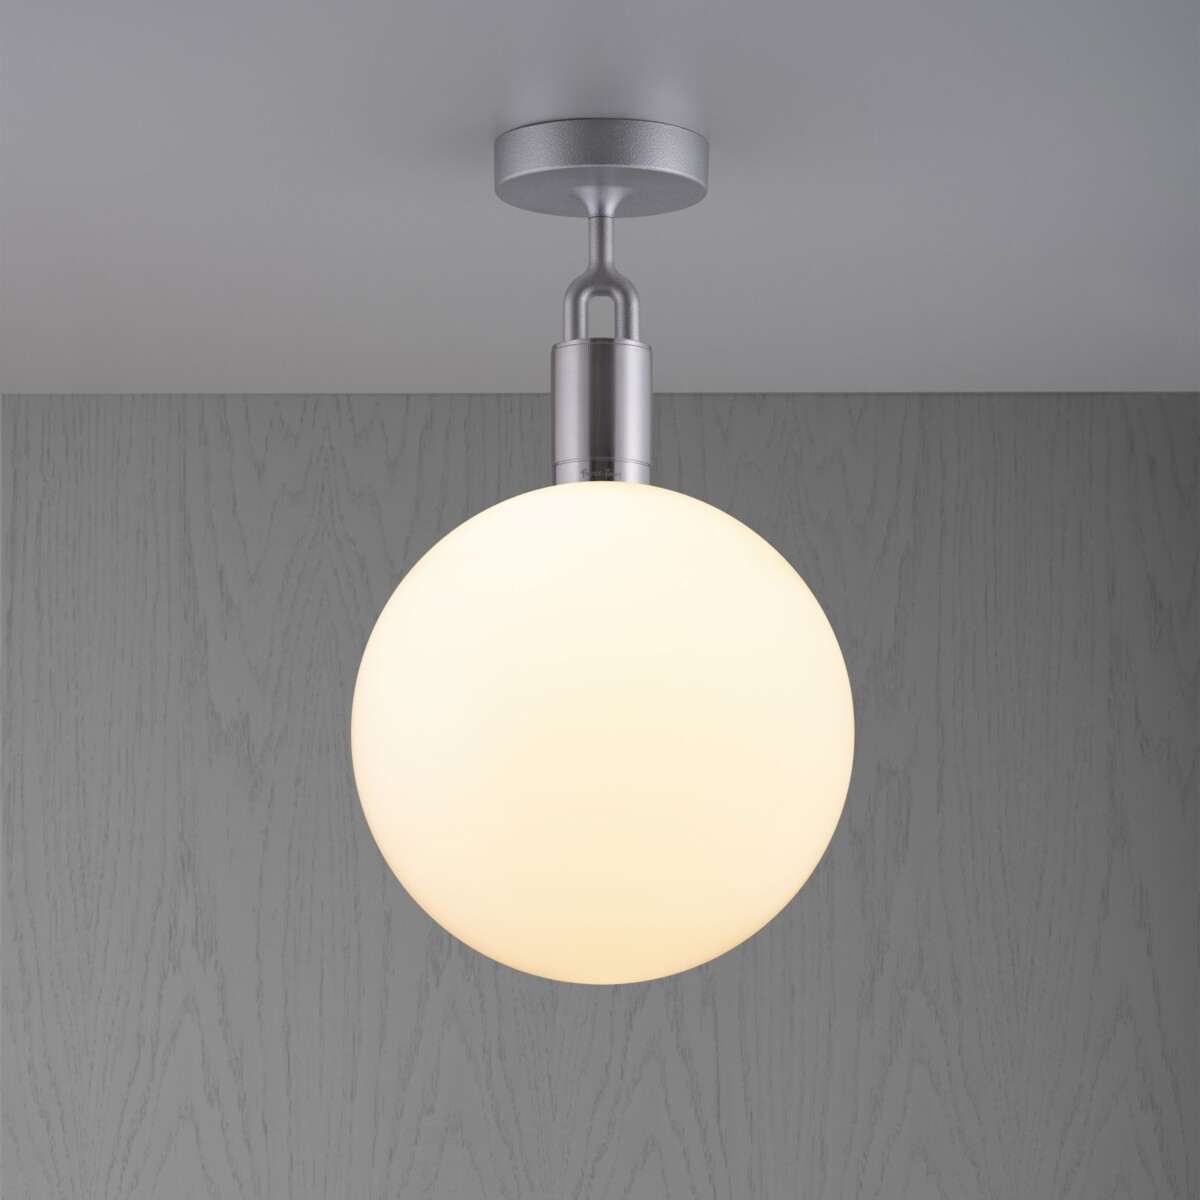 Forked_lighting_Ceiling_Steel_Large_Opal_Globe_Web-scaled